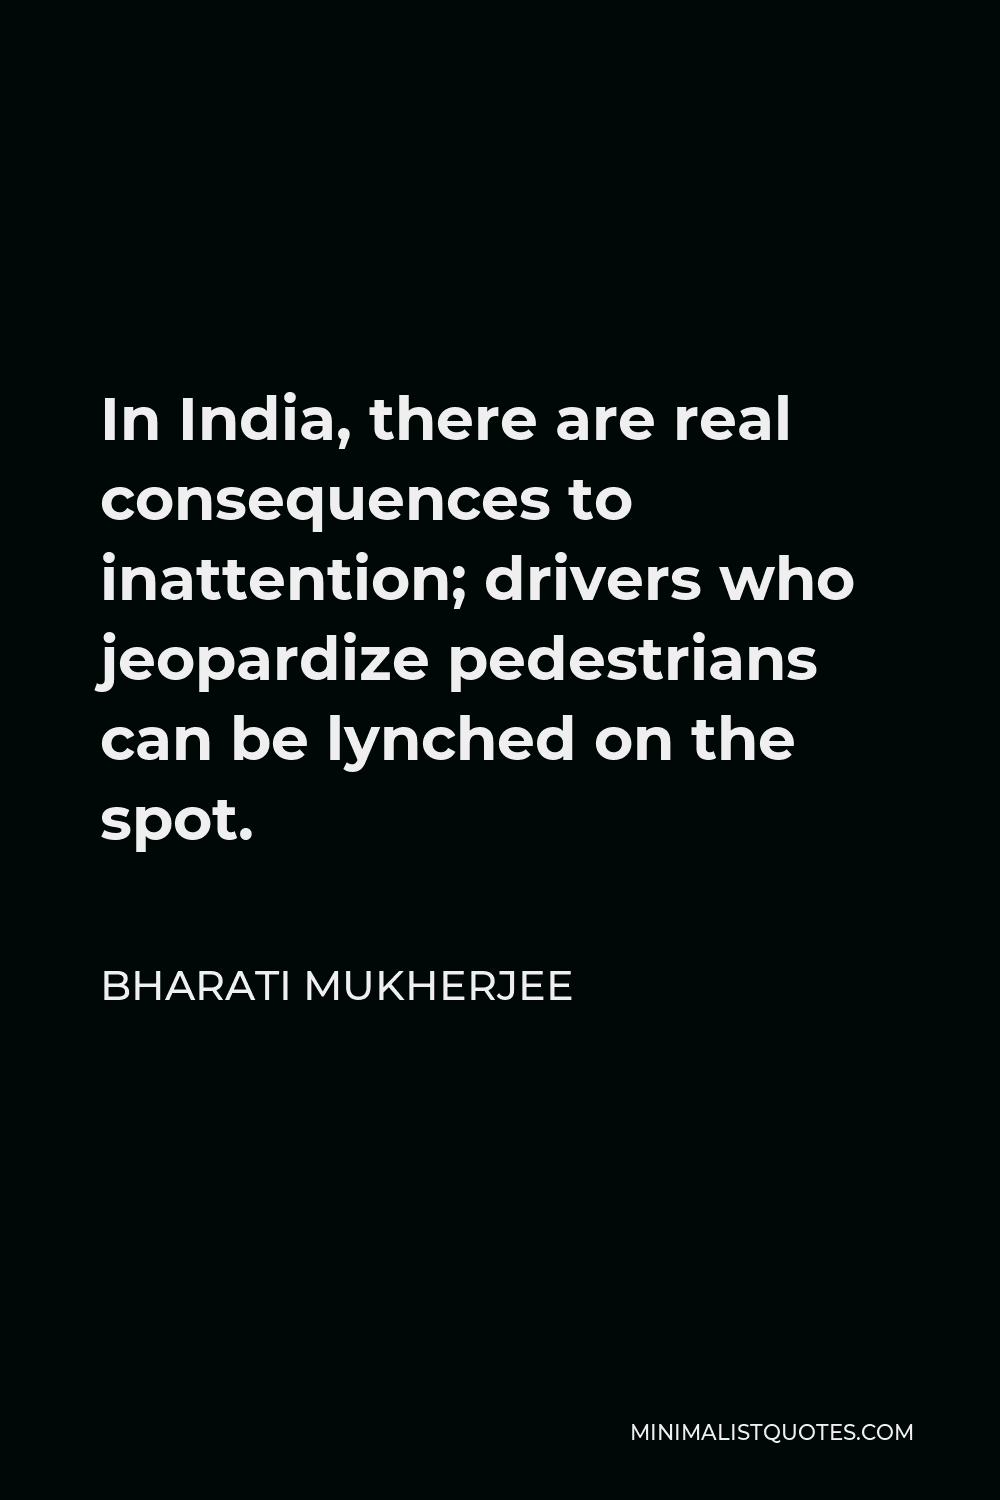 Bharati Mukherjee Quote - In India, there are real consequences to inattention; drivers who jeopardize pedestrians can be lynched on the spot.